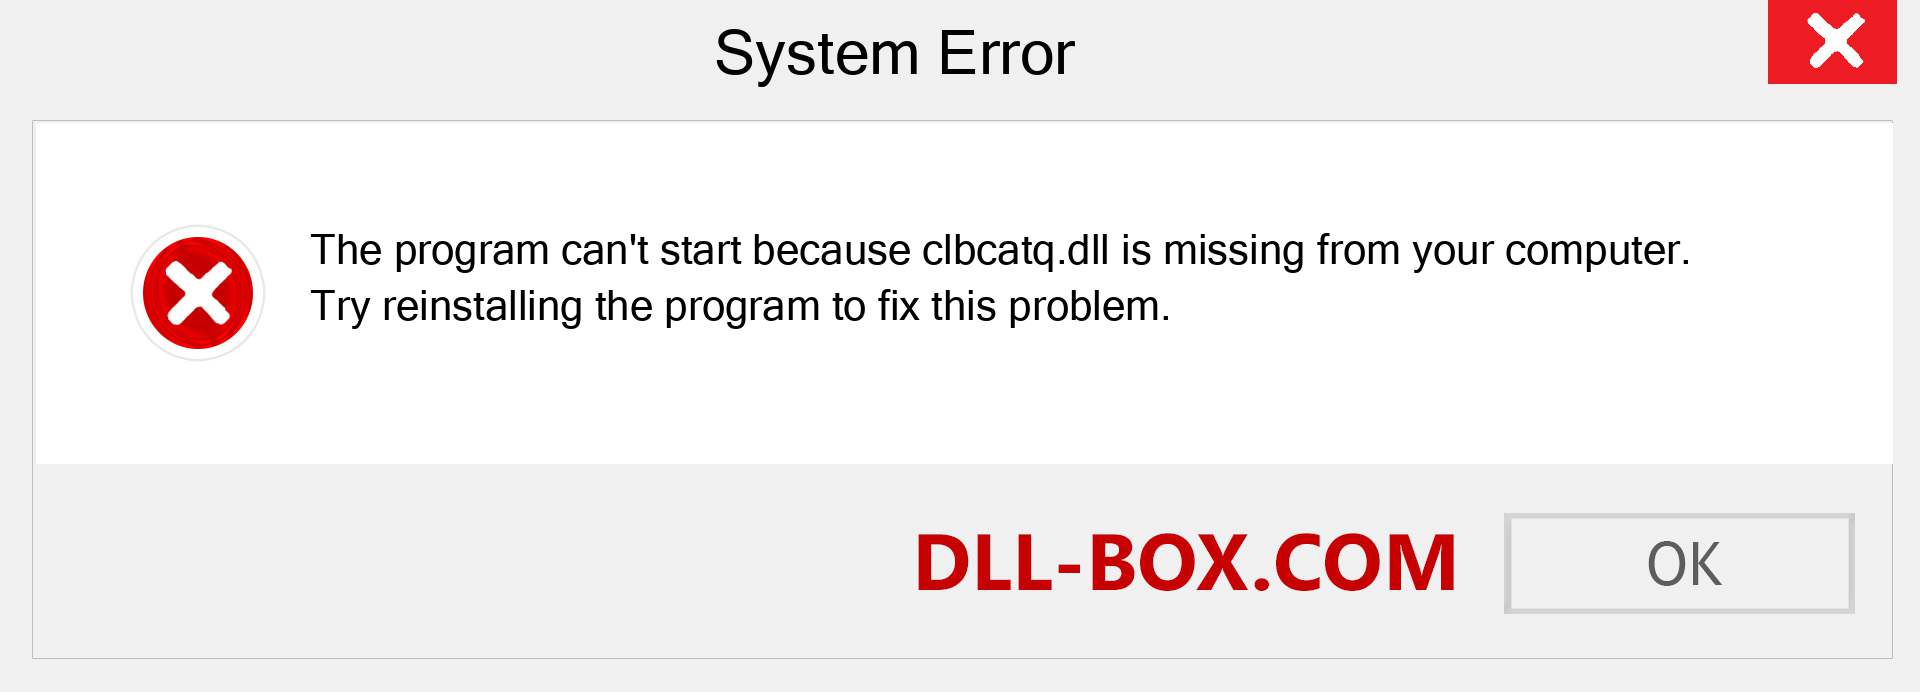  clbcatq.dll file is missing?. Download for Windows 7, 8, 10 - Fix  clbcatq dll Missing Error on Windows, photos, images